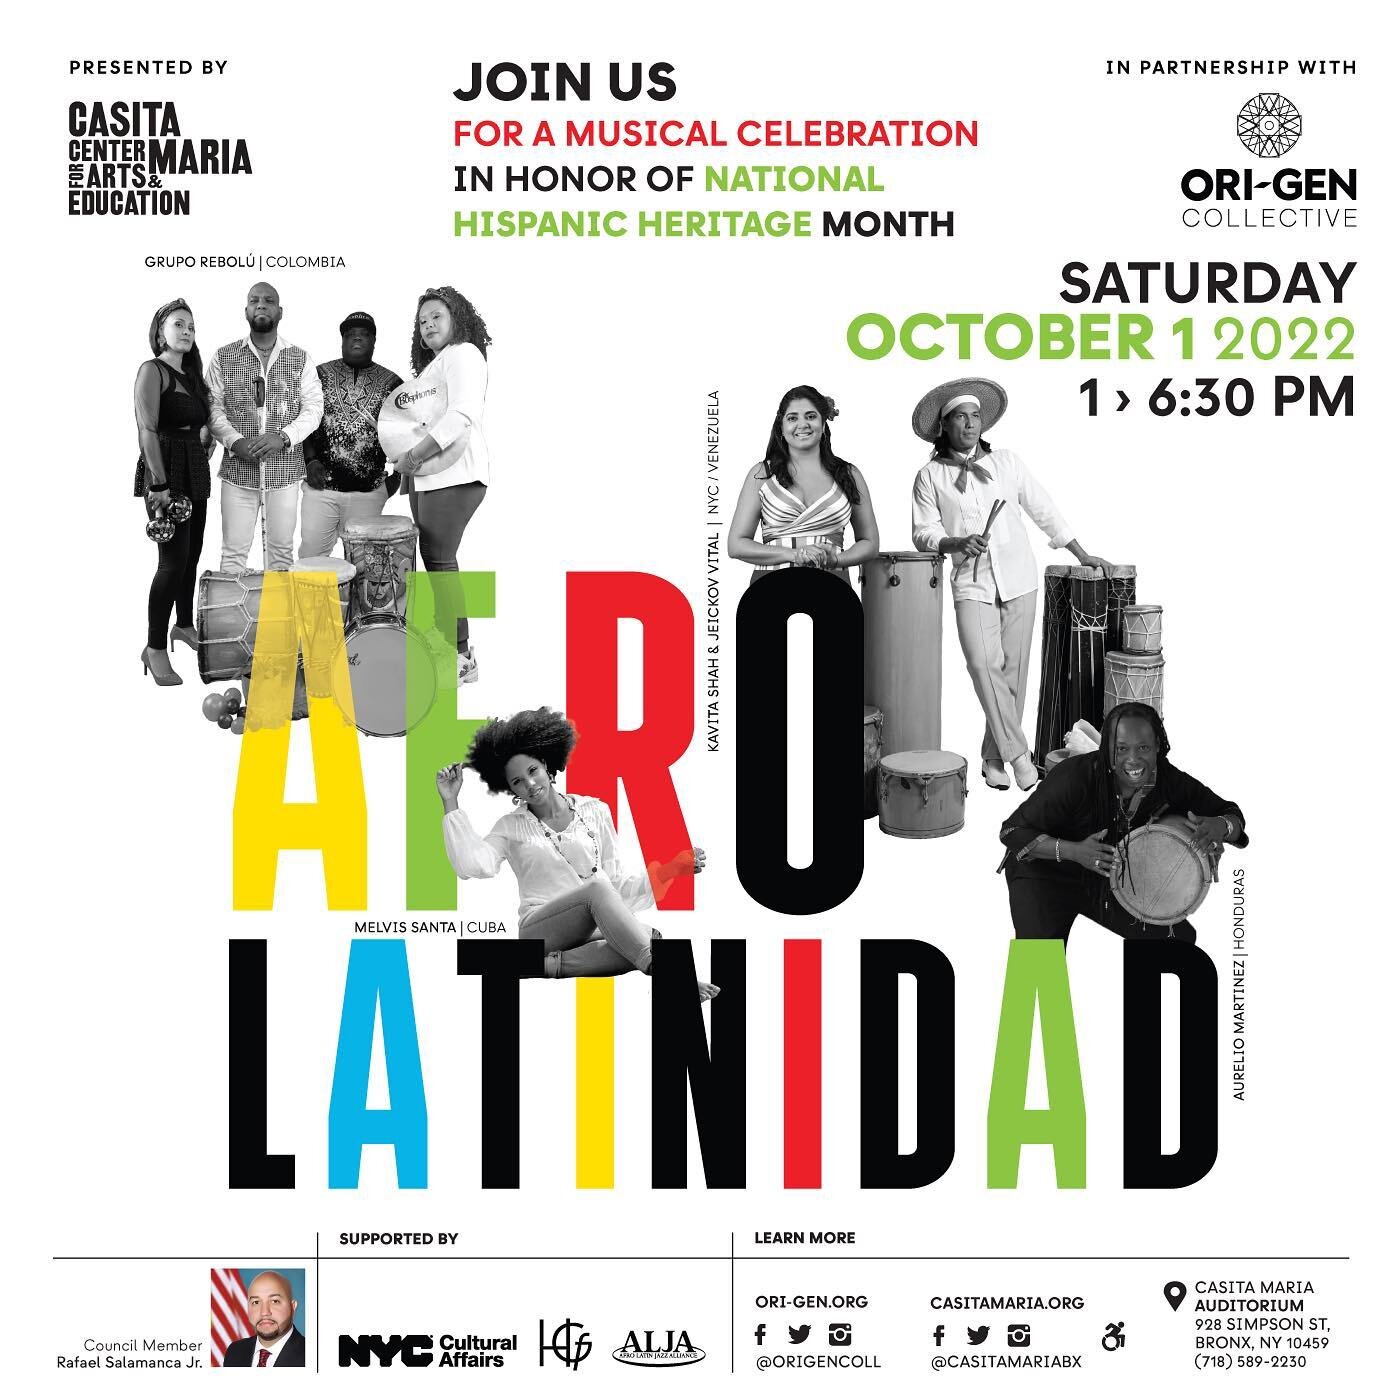 Dear New Yorkers, today Saturday October 1, I am participating on this event as a producer, curator and guitarist, in partnership with @casitamariabx under the umbrella of @origencoll and @afrolatinjazz 

We will be presenting a lineup celebrating Af